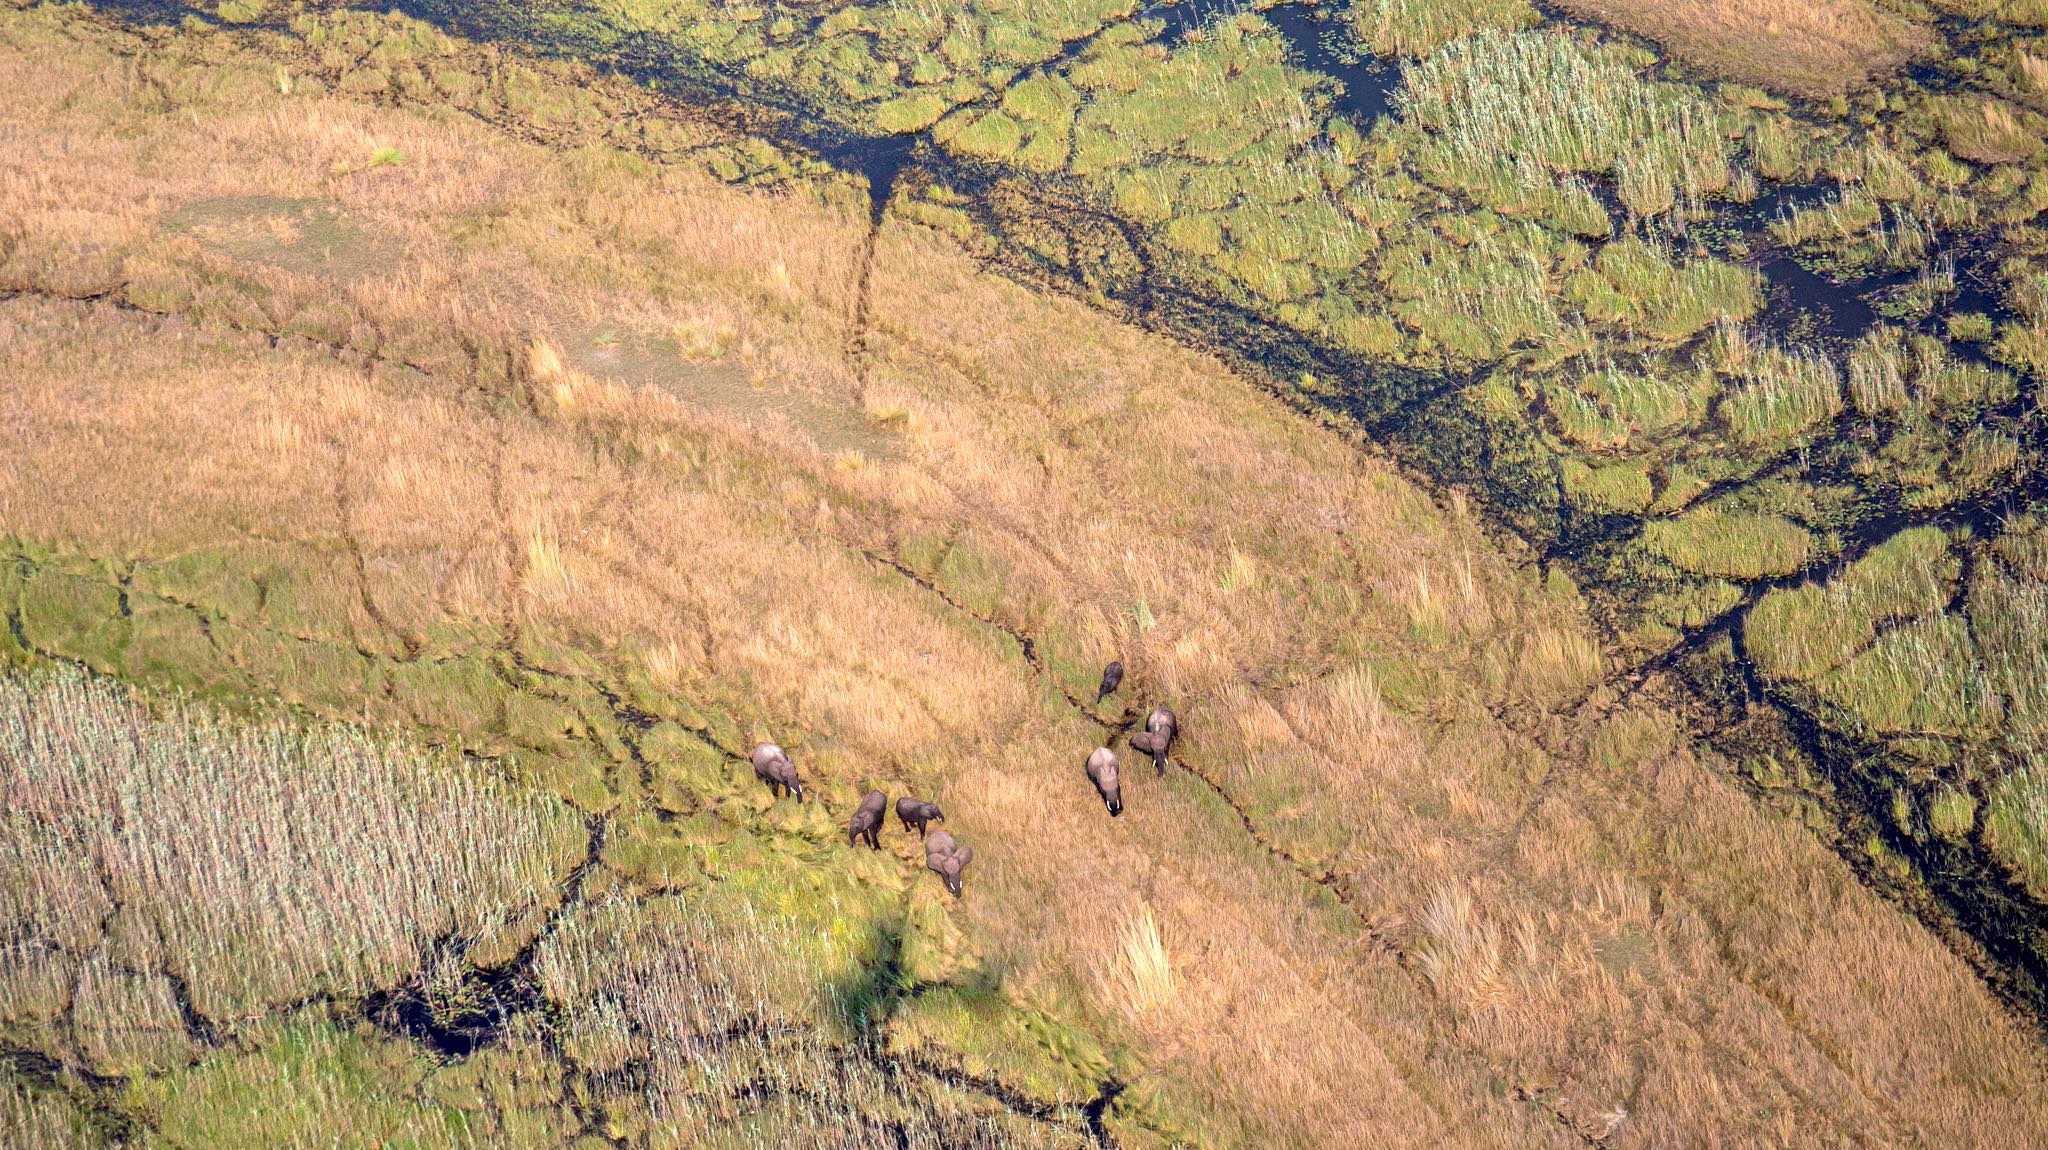 Aerial view of an elephant herd in a riverine landscape.